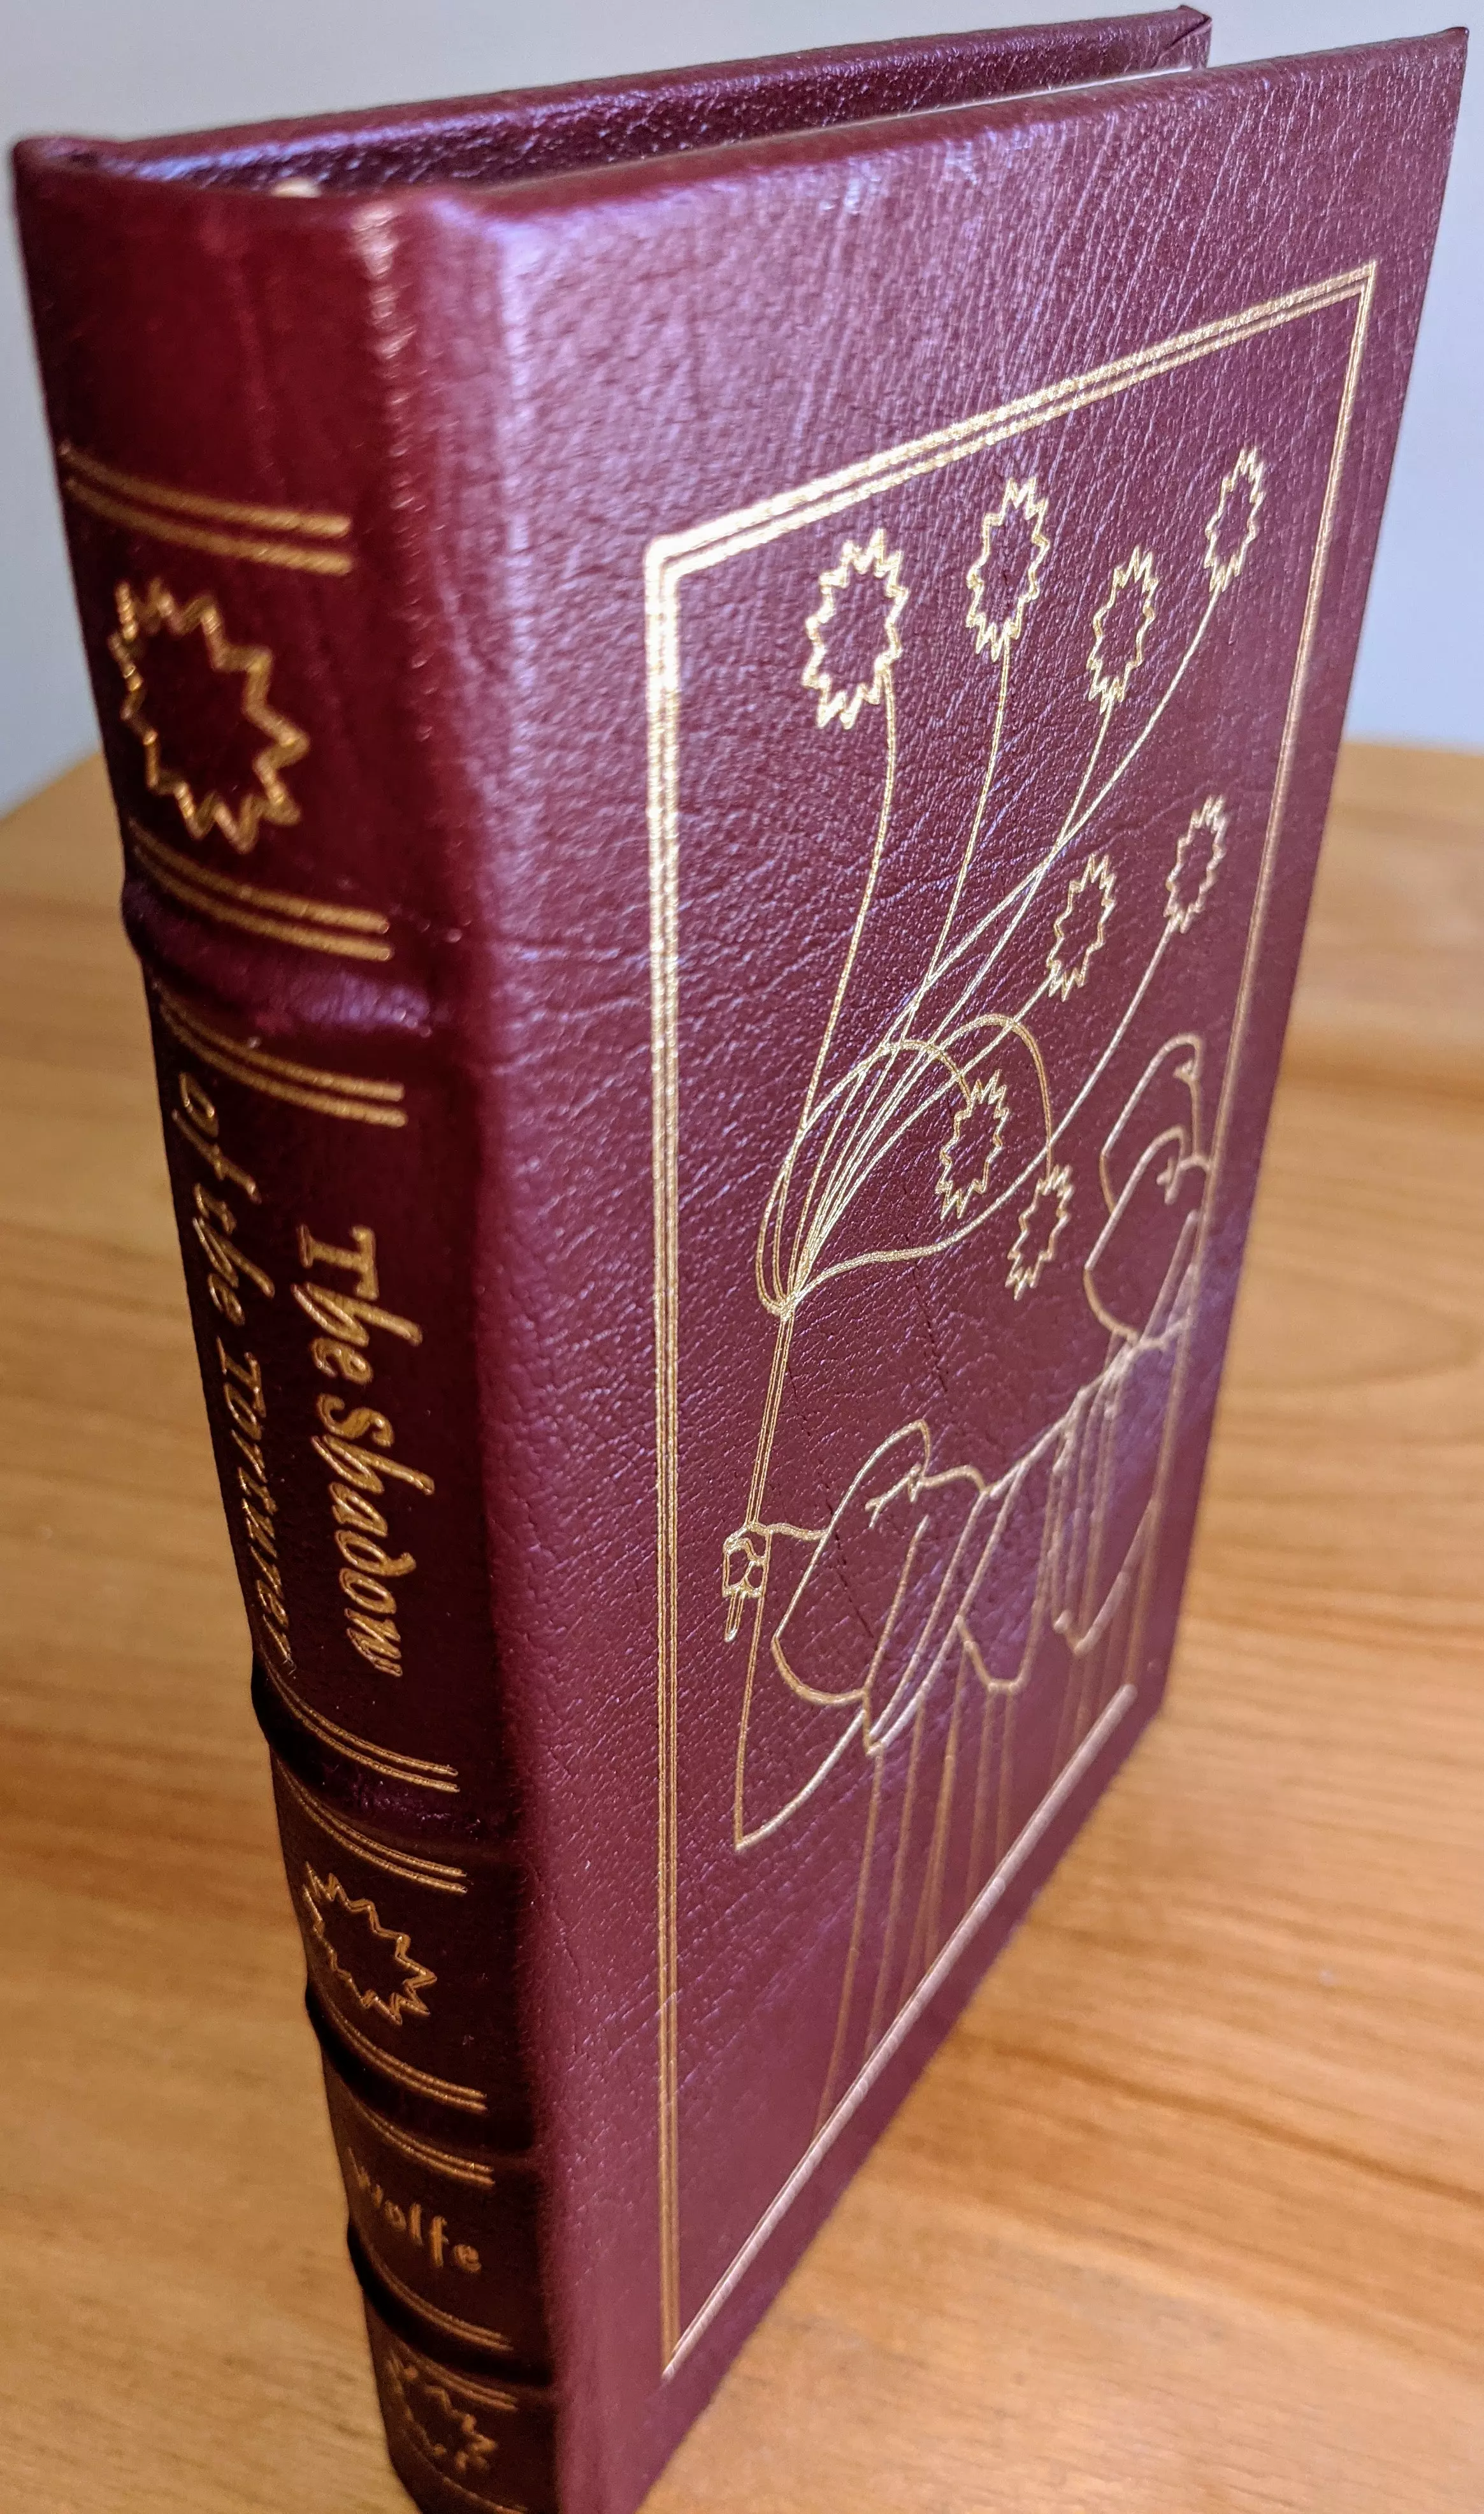 Stunning Red Leather Bound hardback book with hubbed spine, cover artwork in 22kt gold, printed on archival paper with gold gilded edges, smyth sewing & concealed muslin joints
	  - original artwork by Michael Mariano